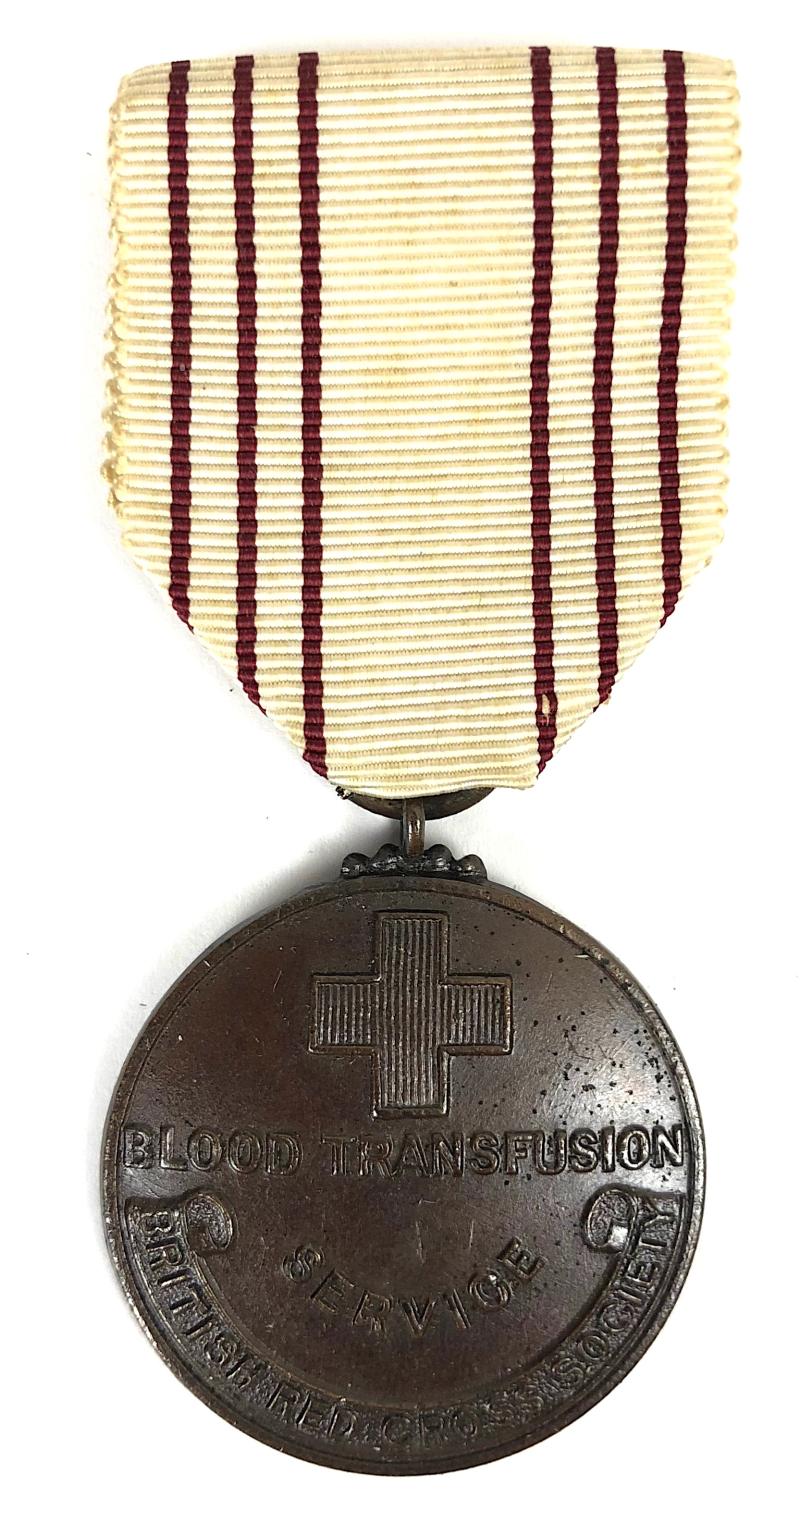 1939 British Red Cross Society blood transfusion service medal